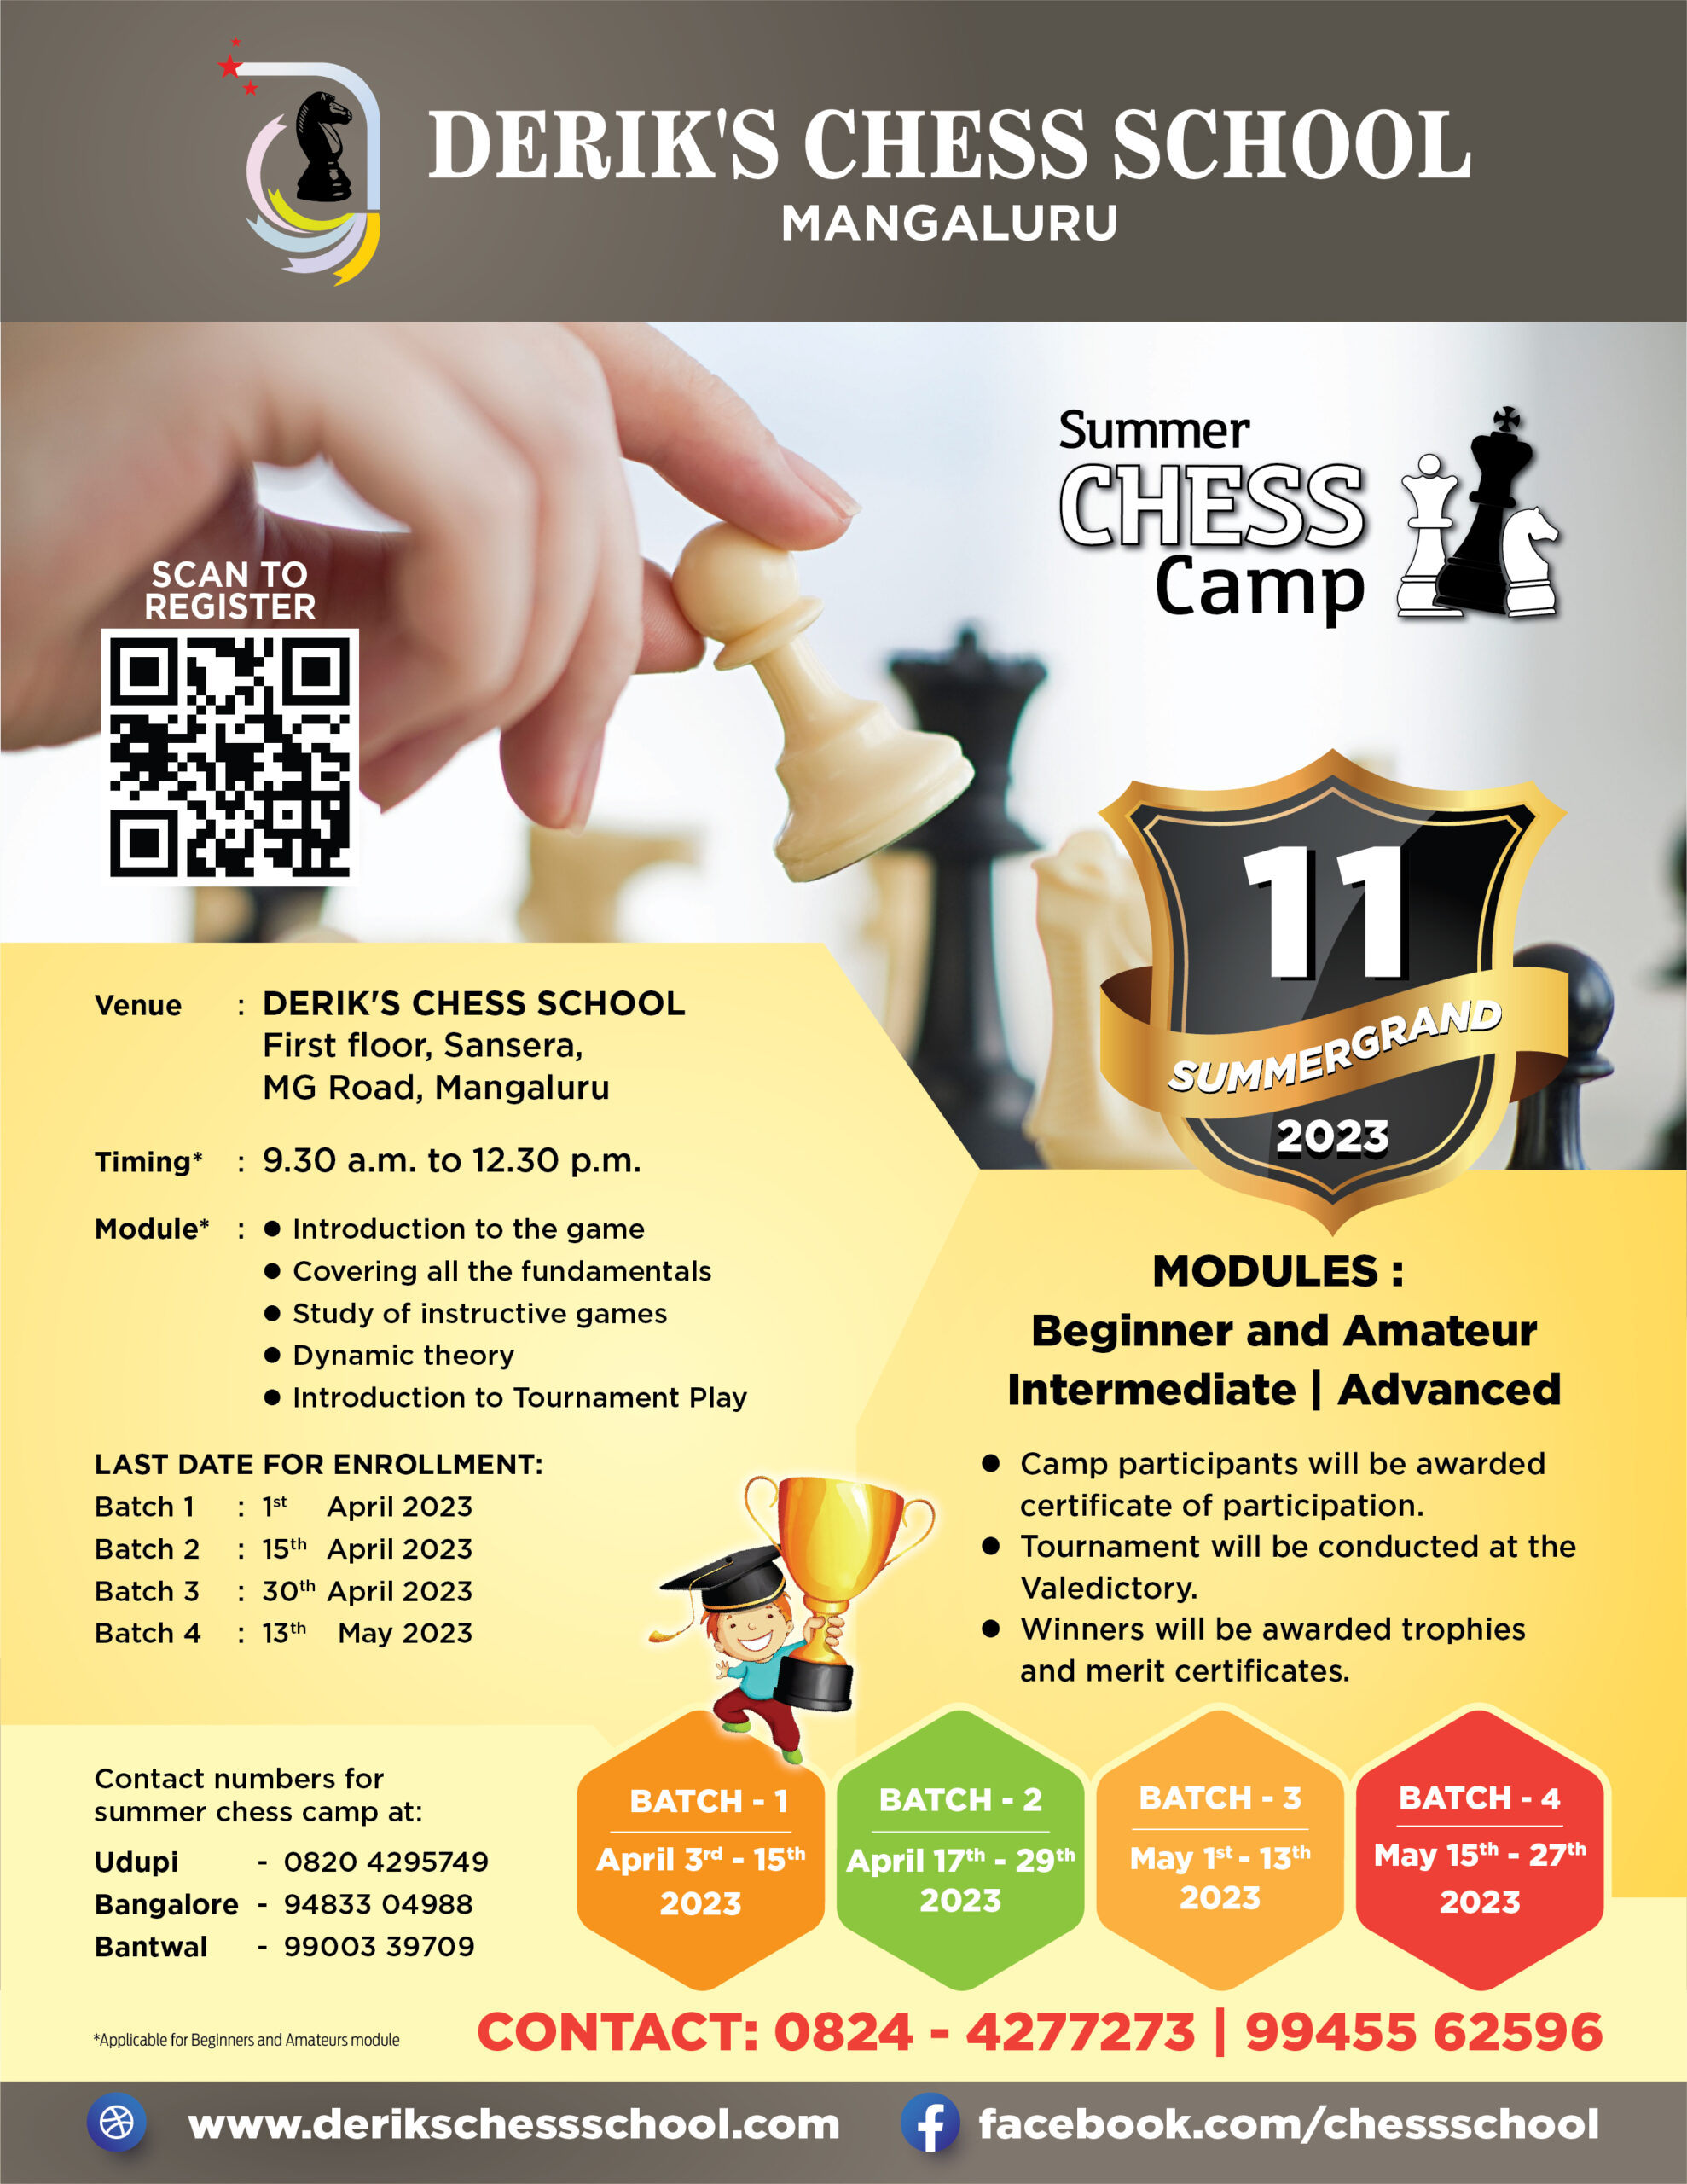 11th SUMMER GRAND CHESS CAMP IN MANGALORE 2023